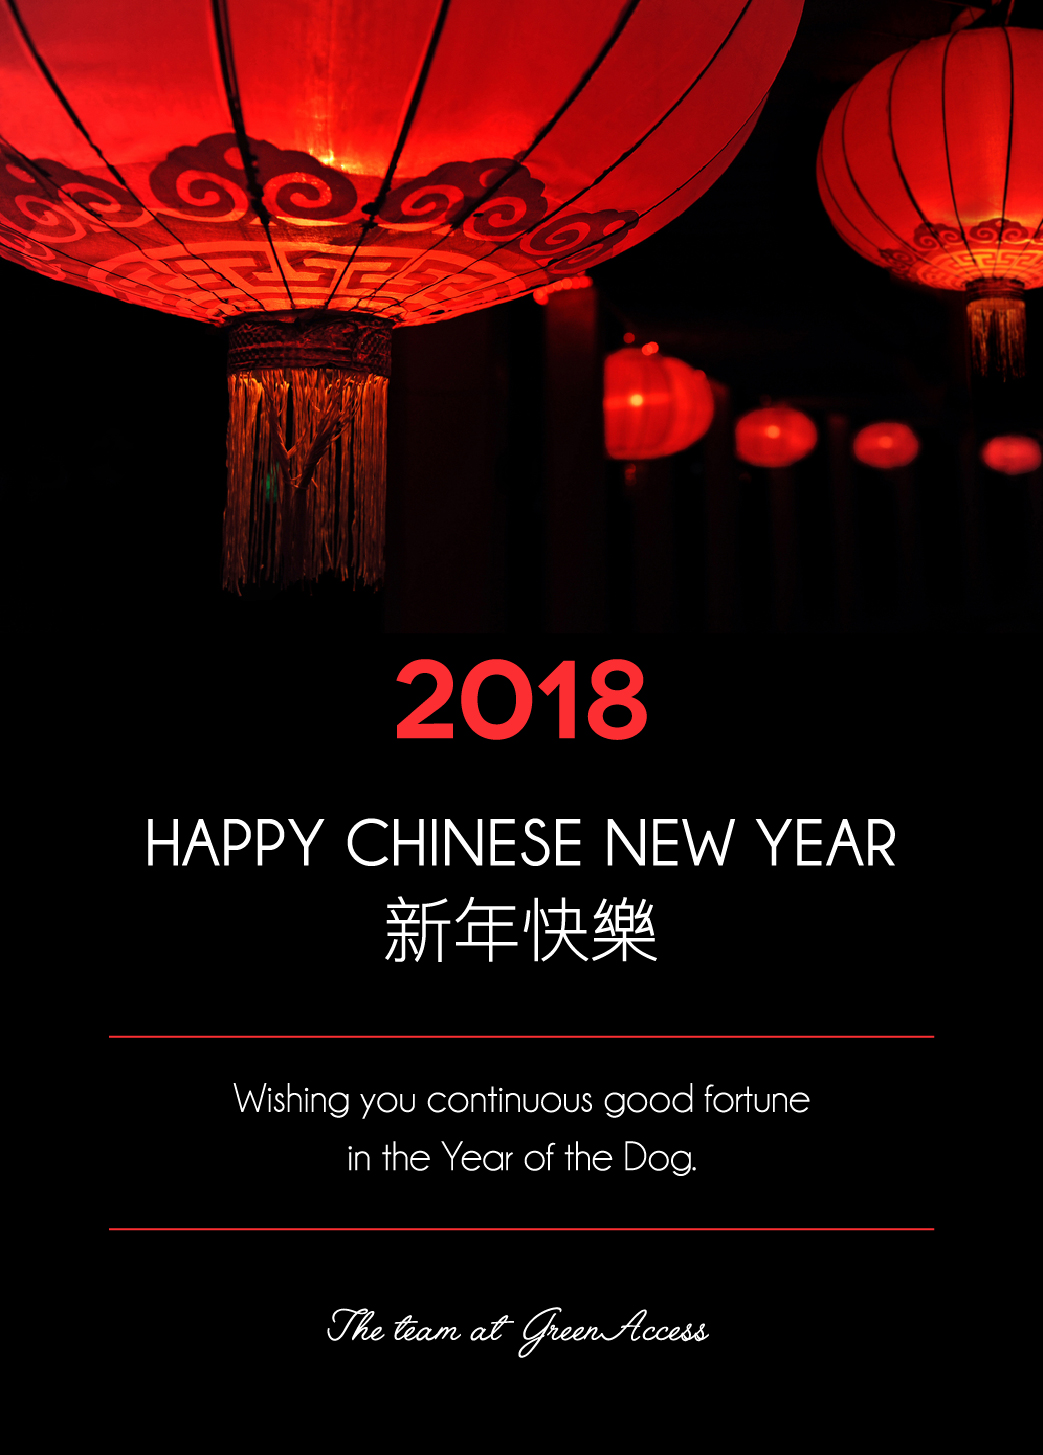 Wishing you continuous good fortune in the Year of the Dog.